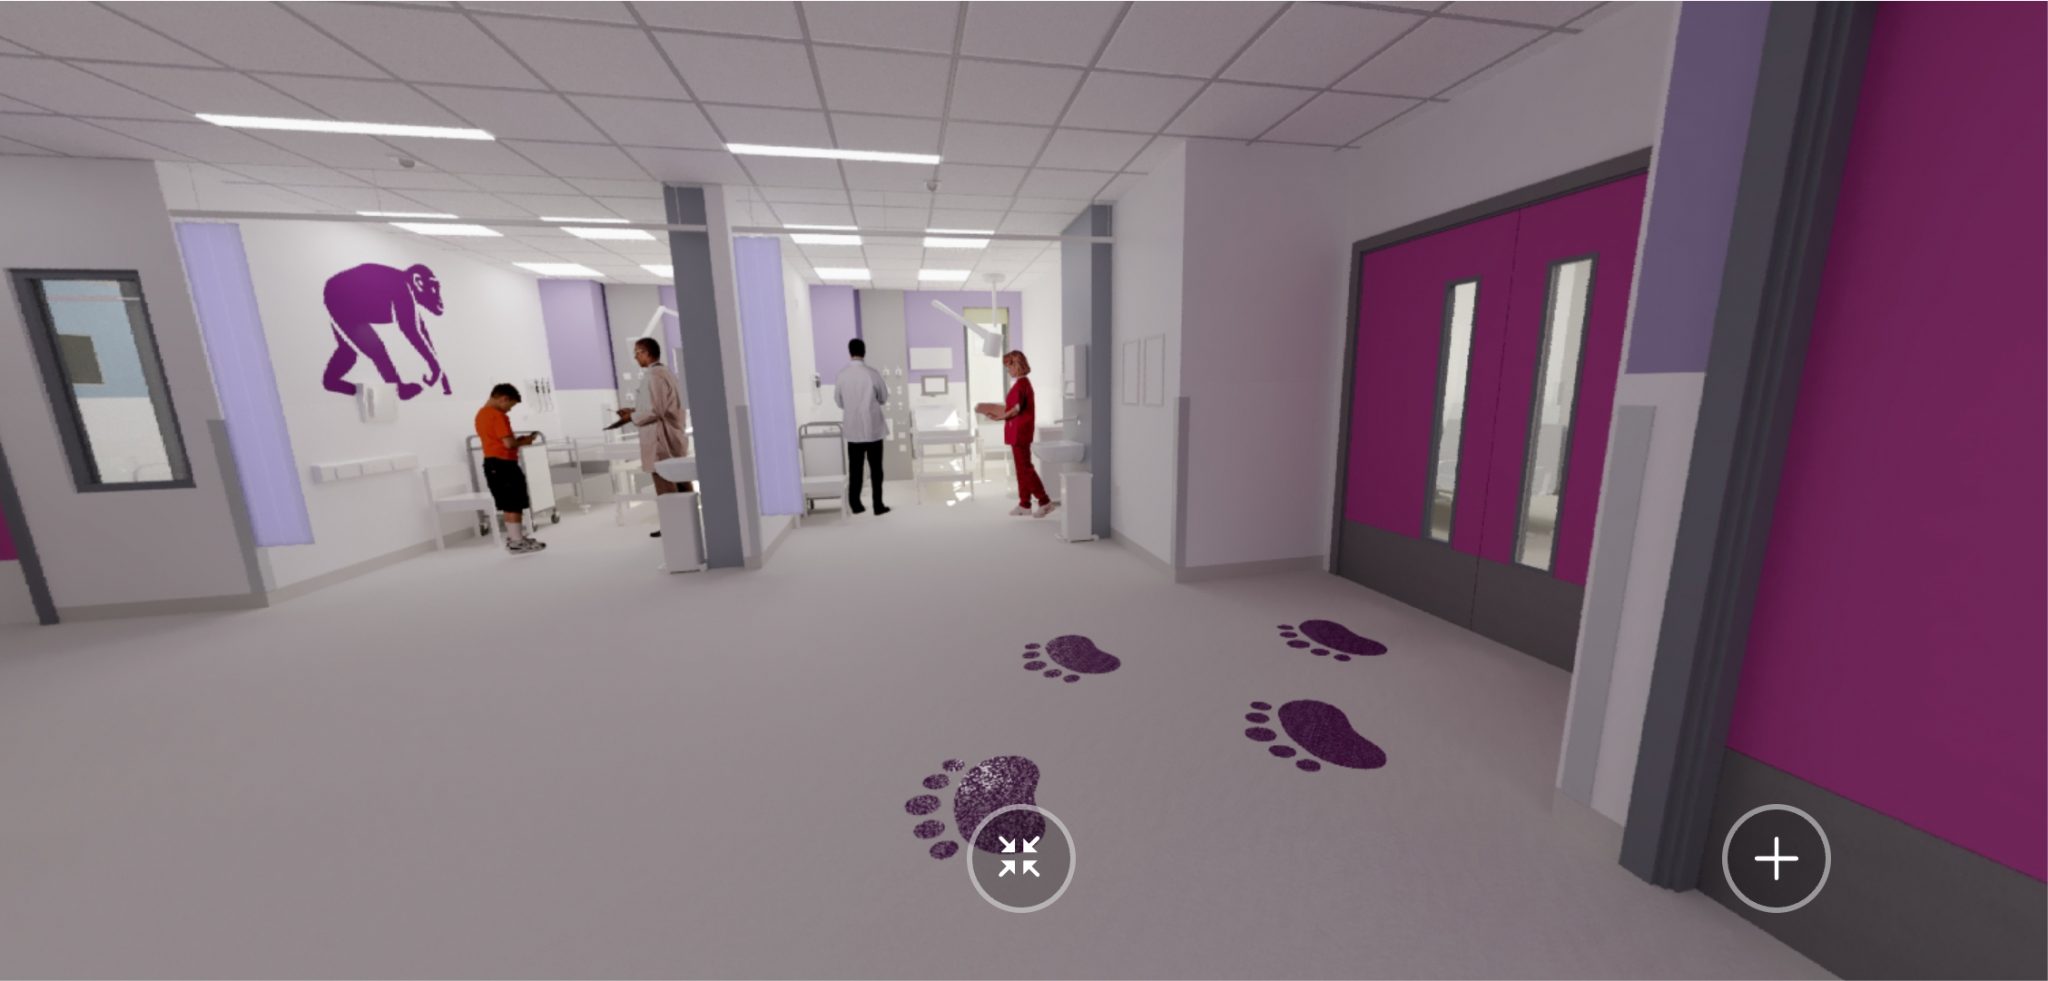 A sneak peek at the paediatric provision in the new build